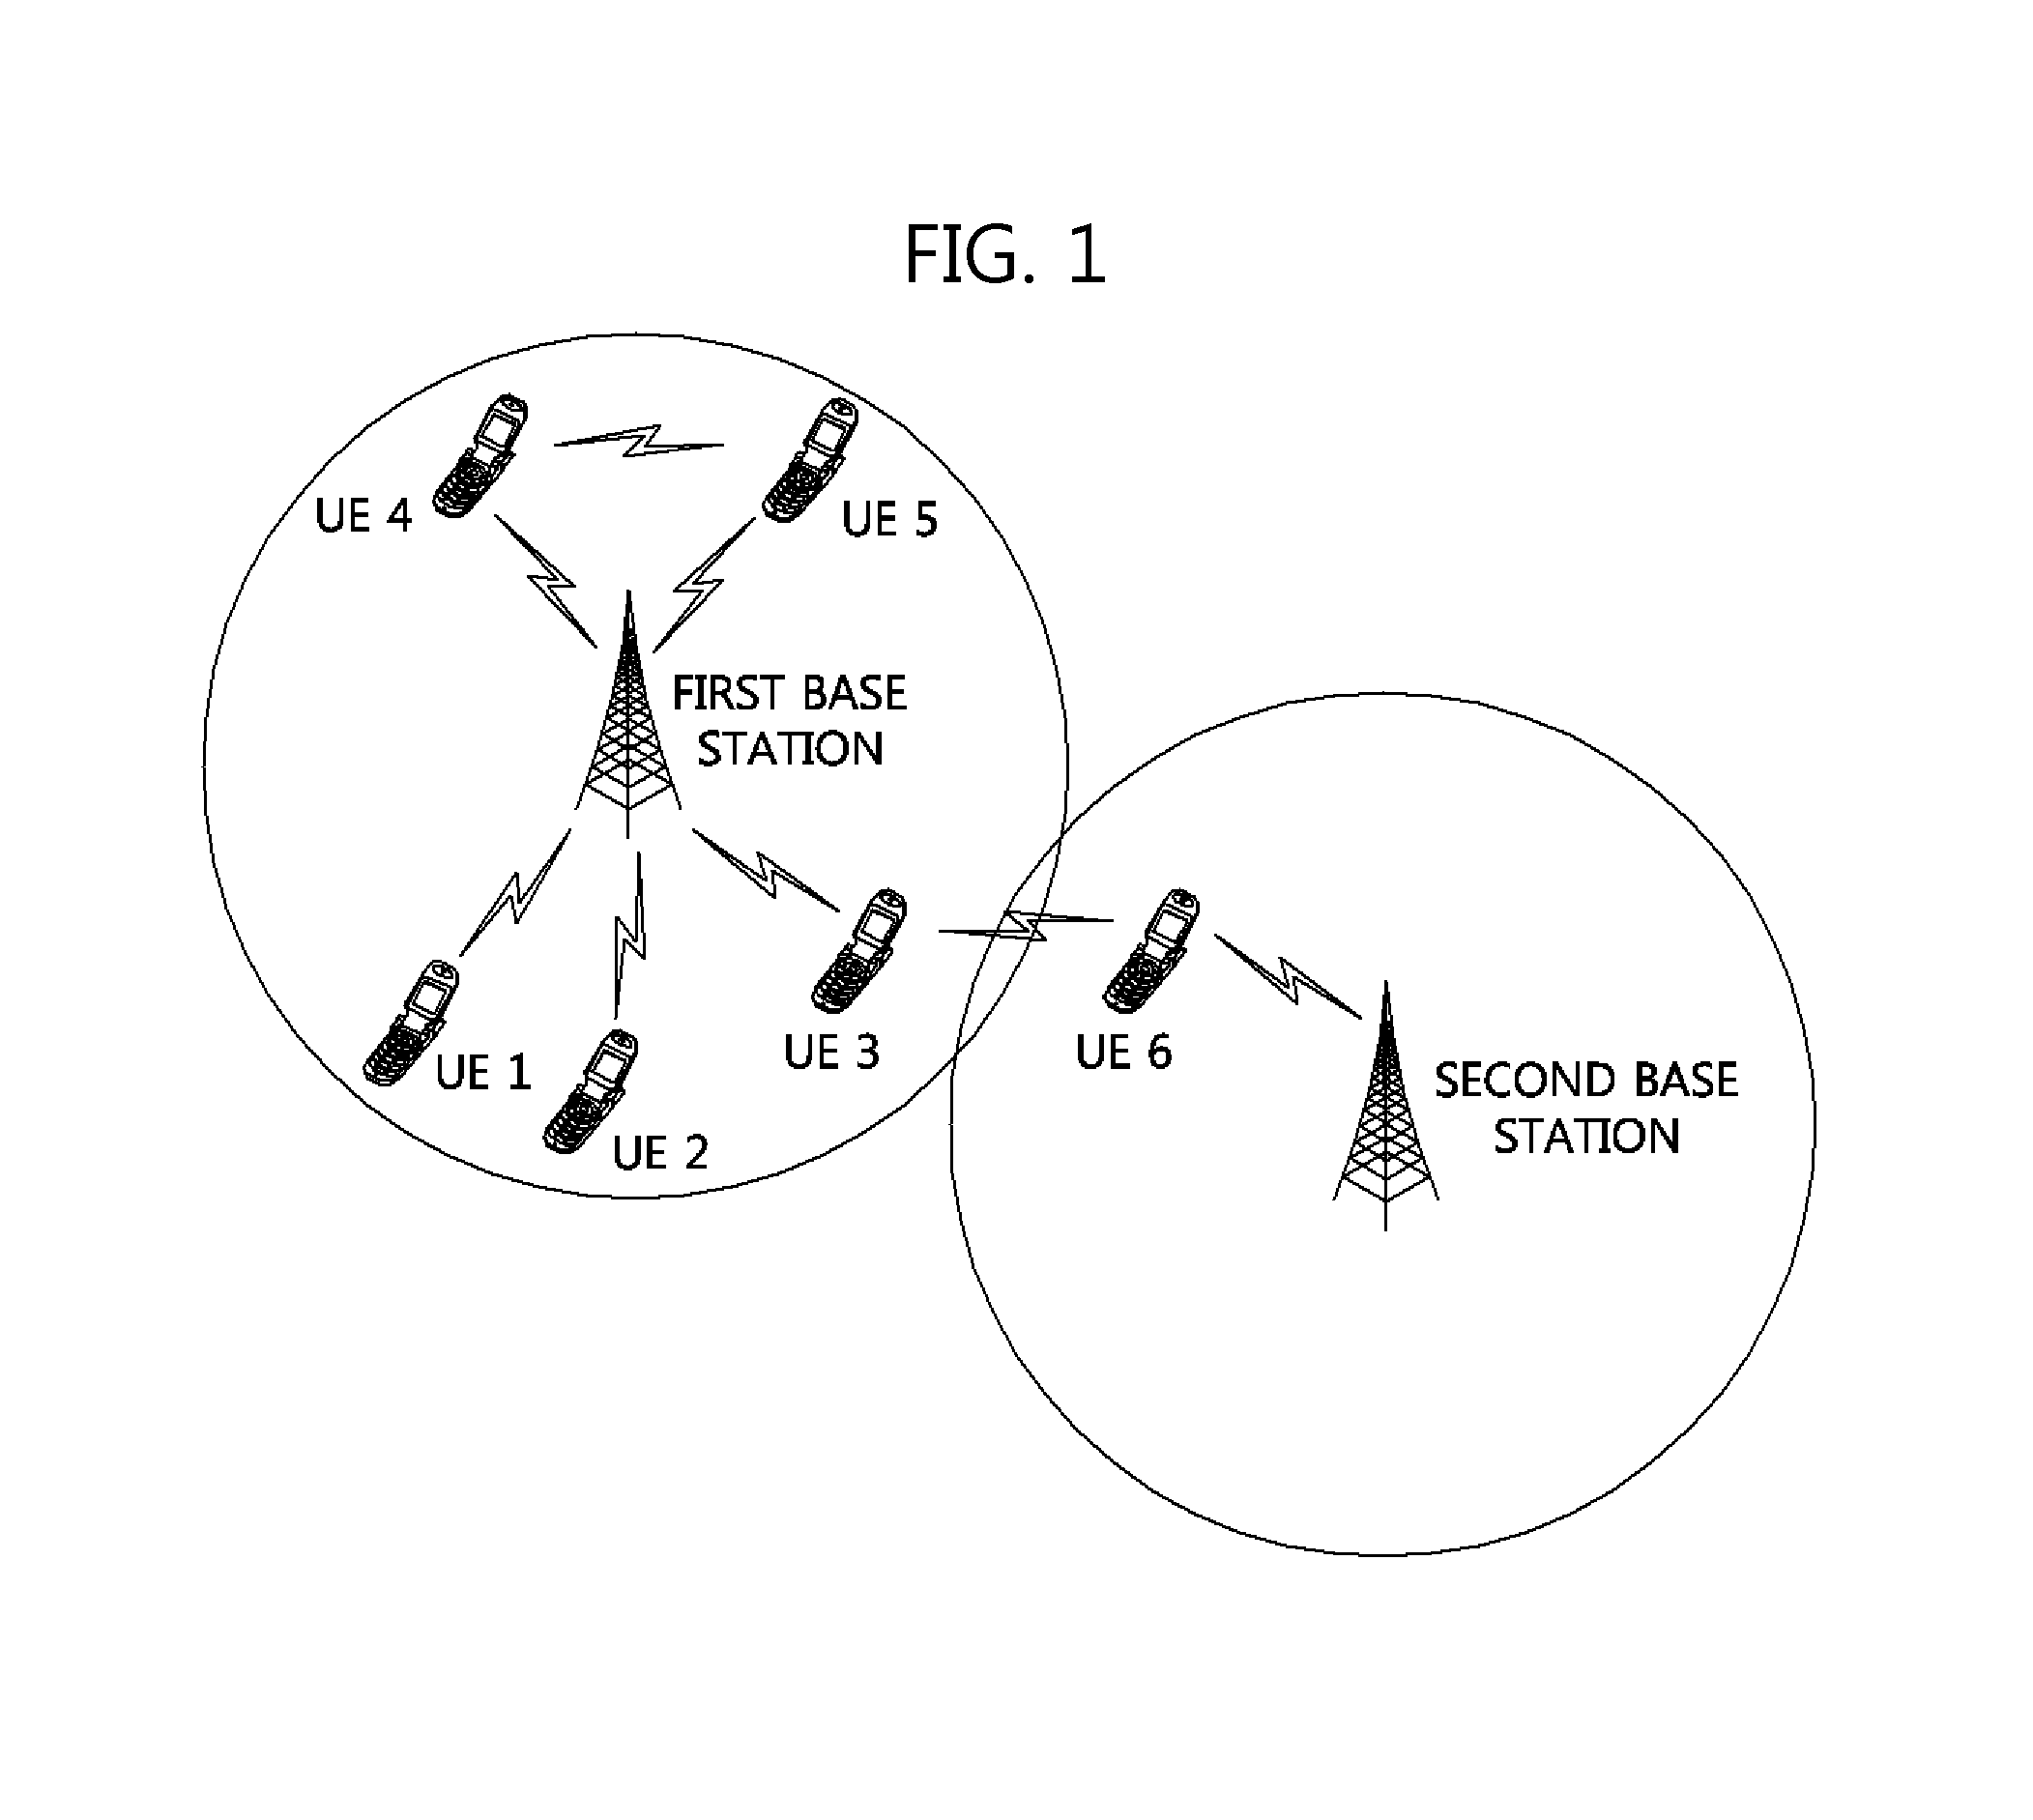 Method of controlling communication resources for cellular mobile communication system-based device-to-device communication